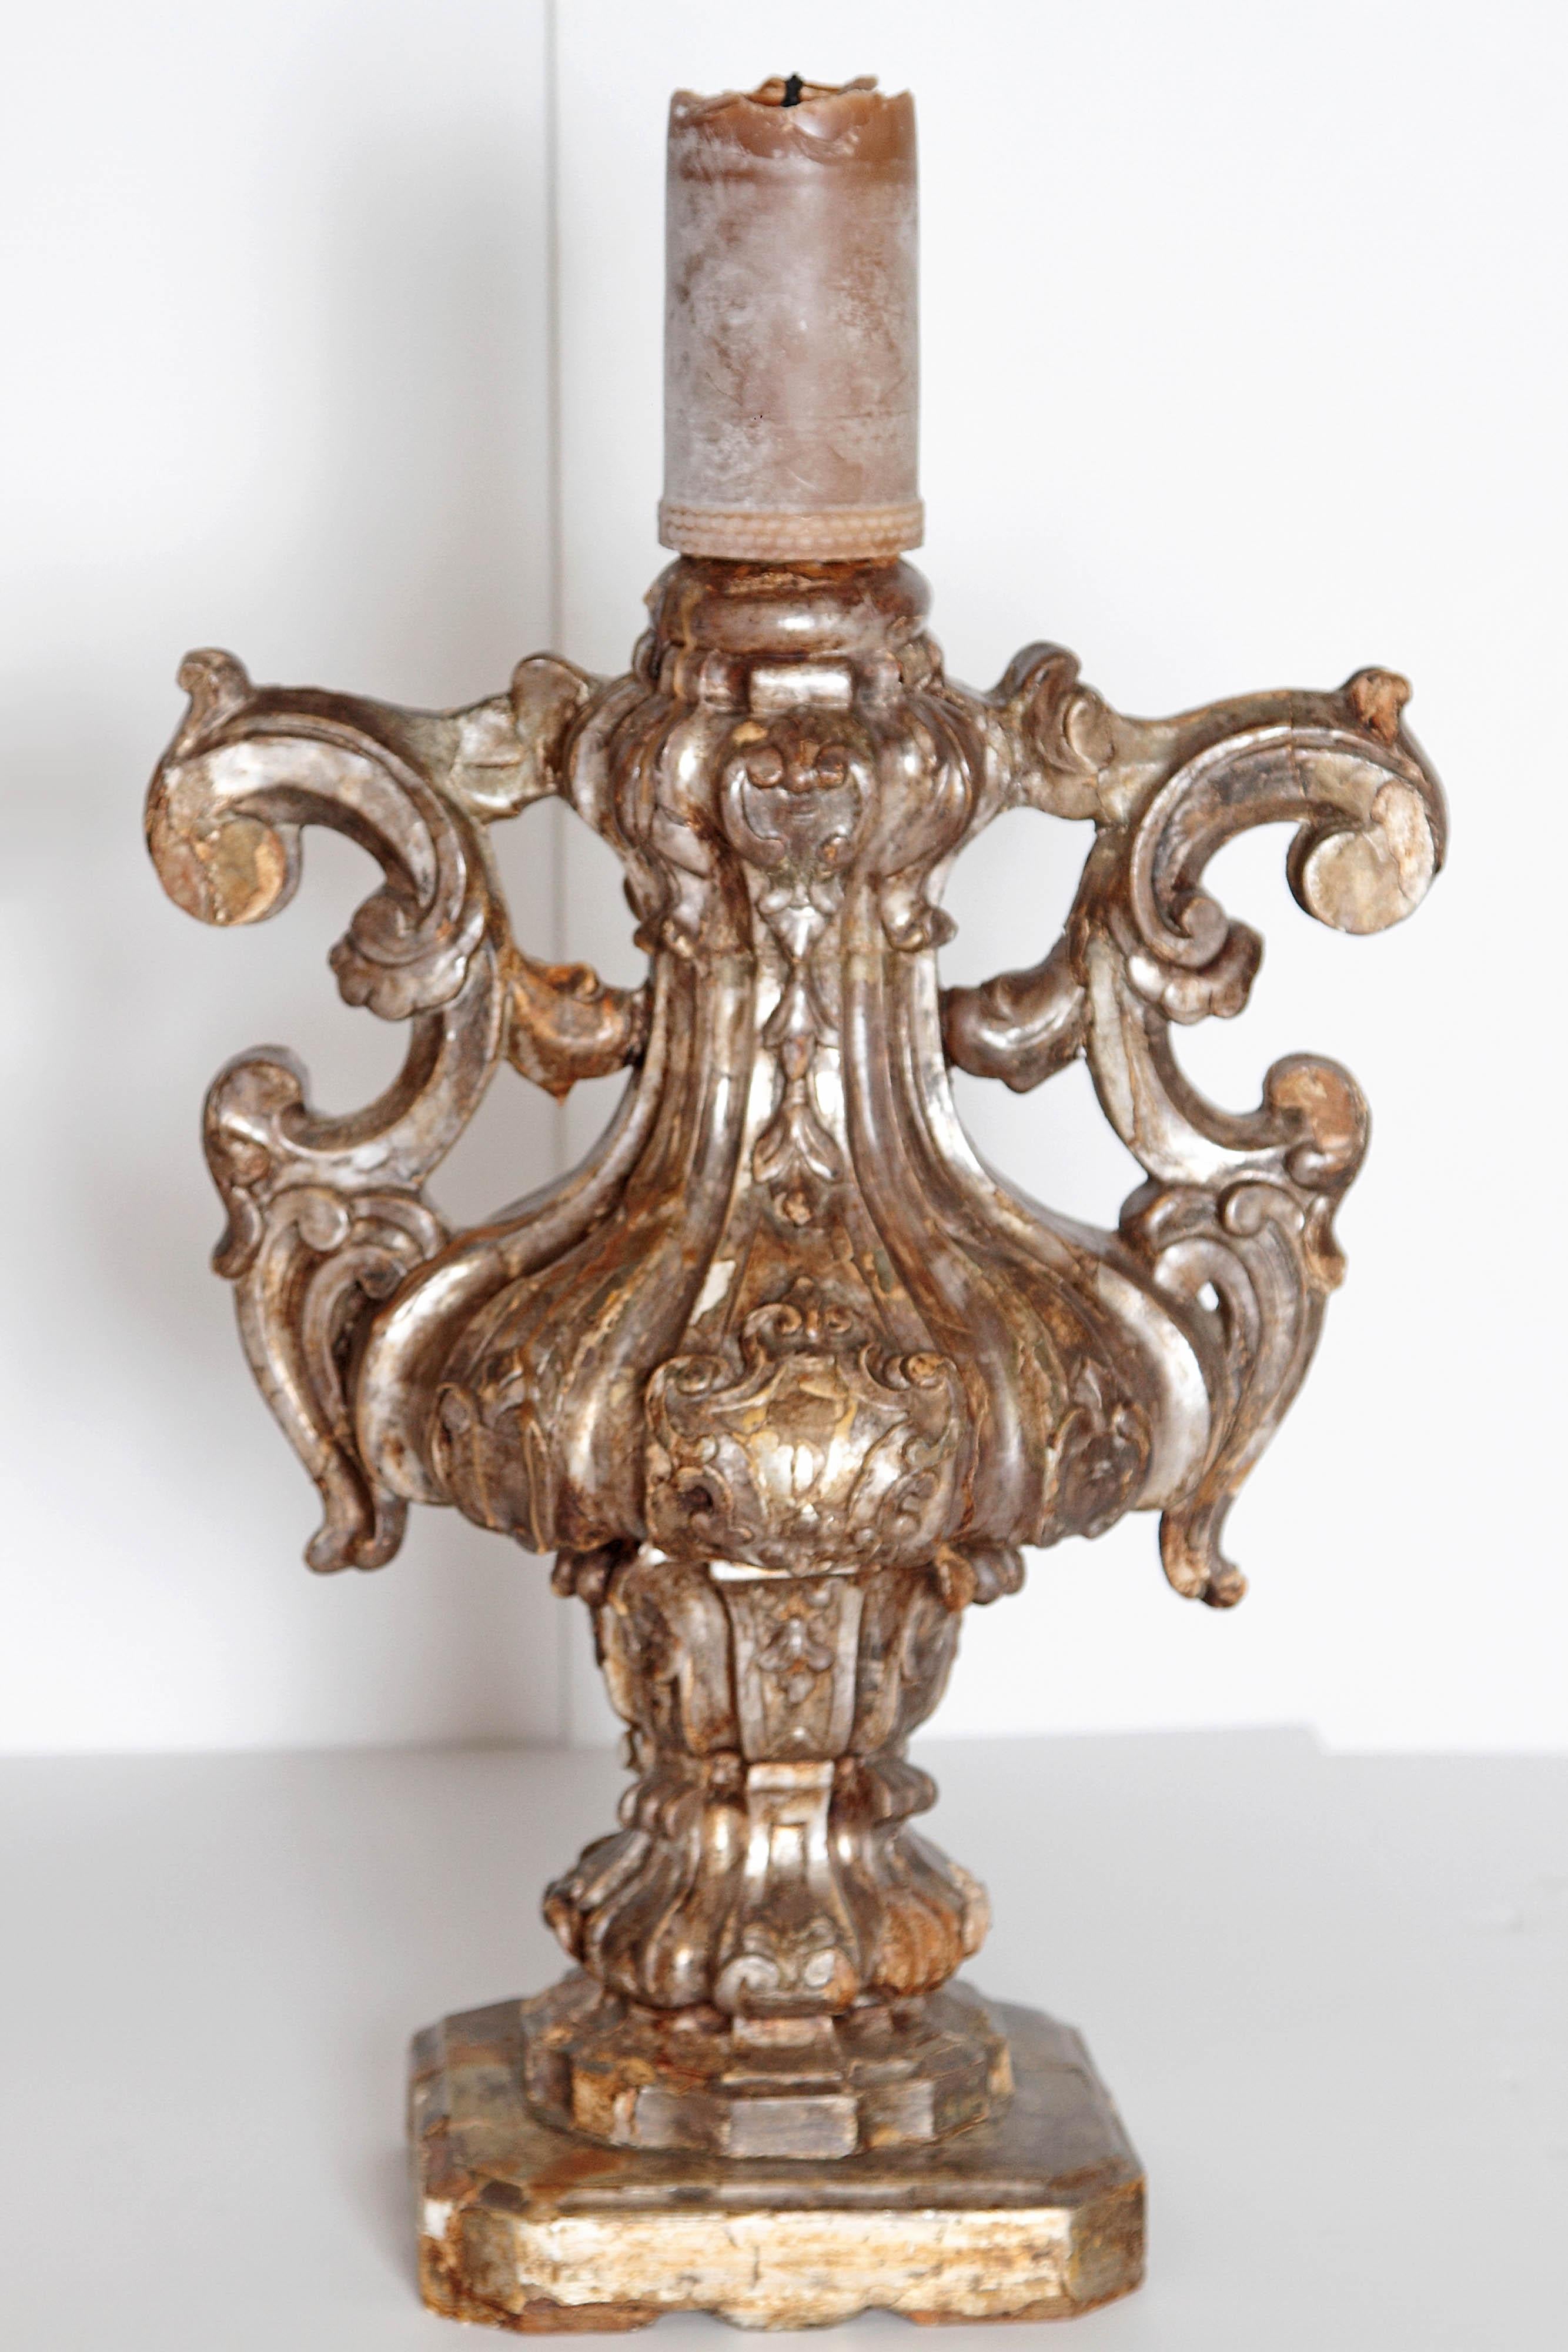 Rococo Pair of Late 18th Century Italian Carved and Gilt Candleholders